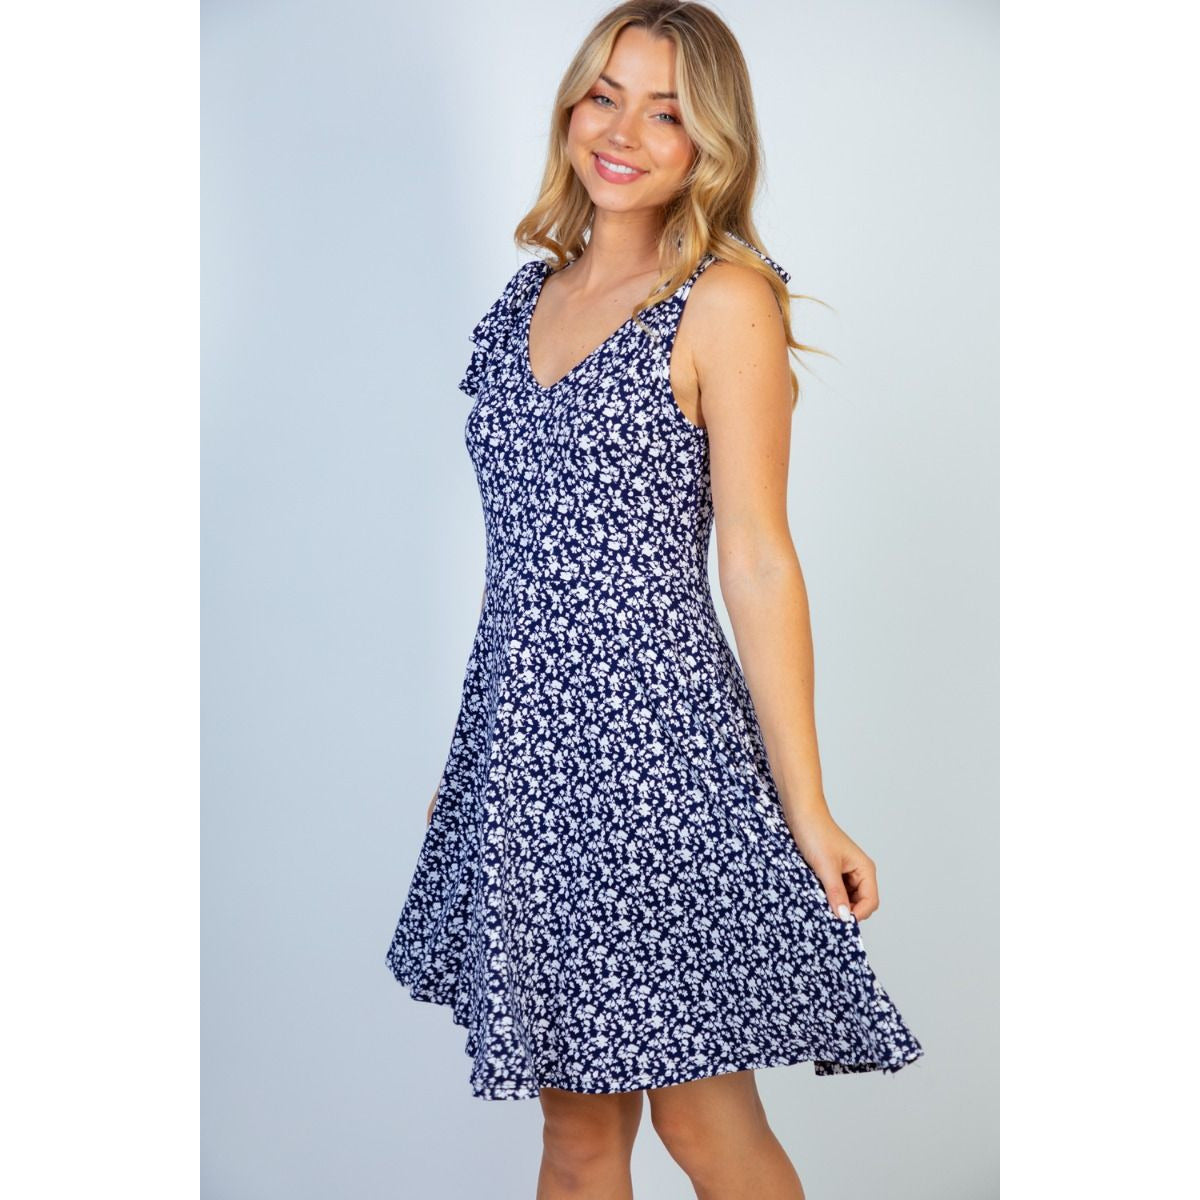 Eleni Blue and White Floral Dress - Rhapsody and Renascence